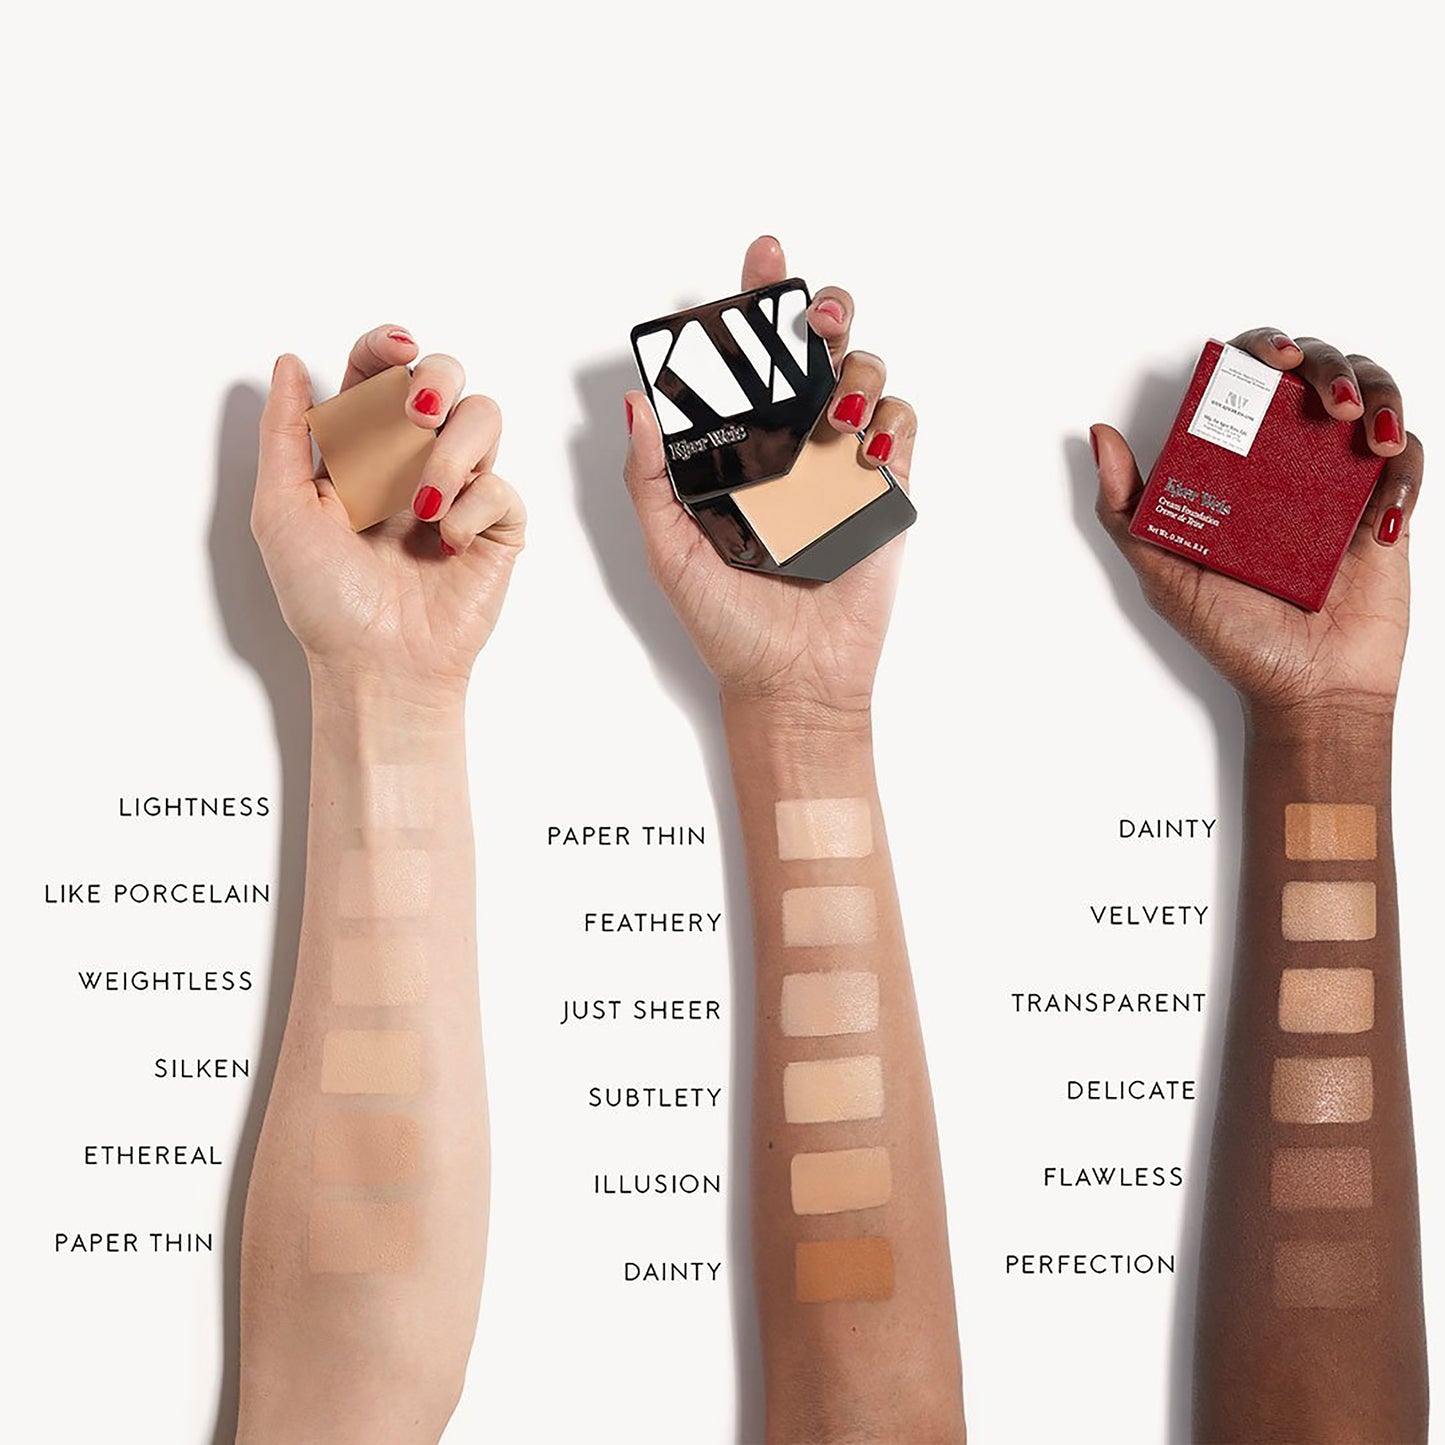 Three arms of three different skin tones all with a swatch of cream foundation from darkest to lightest shade. Paper Thin is the darkest shade on the lightest skin tone.  